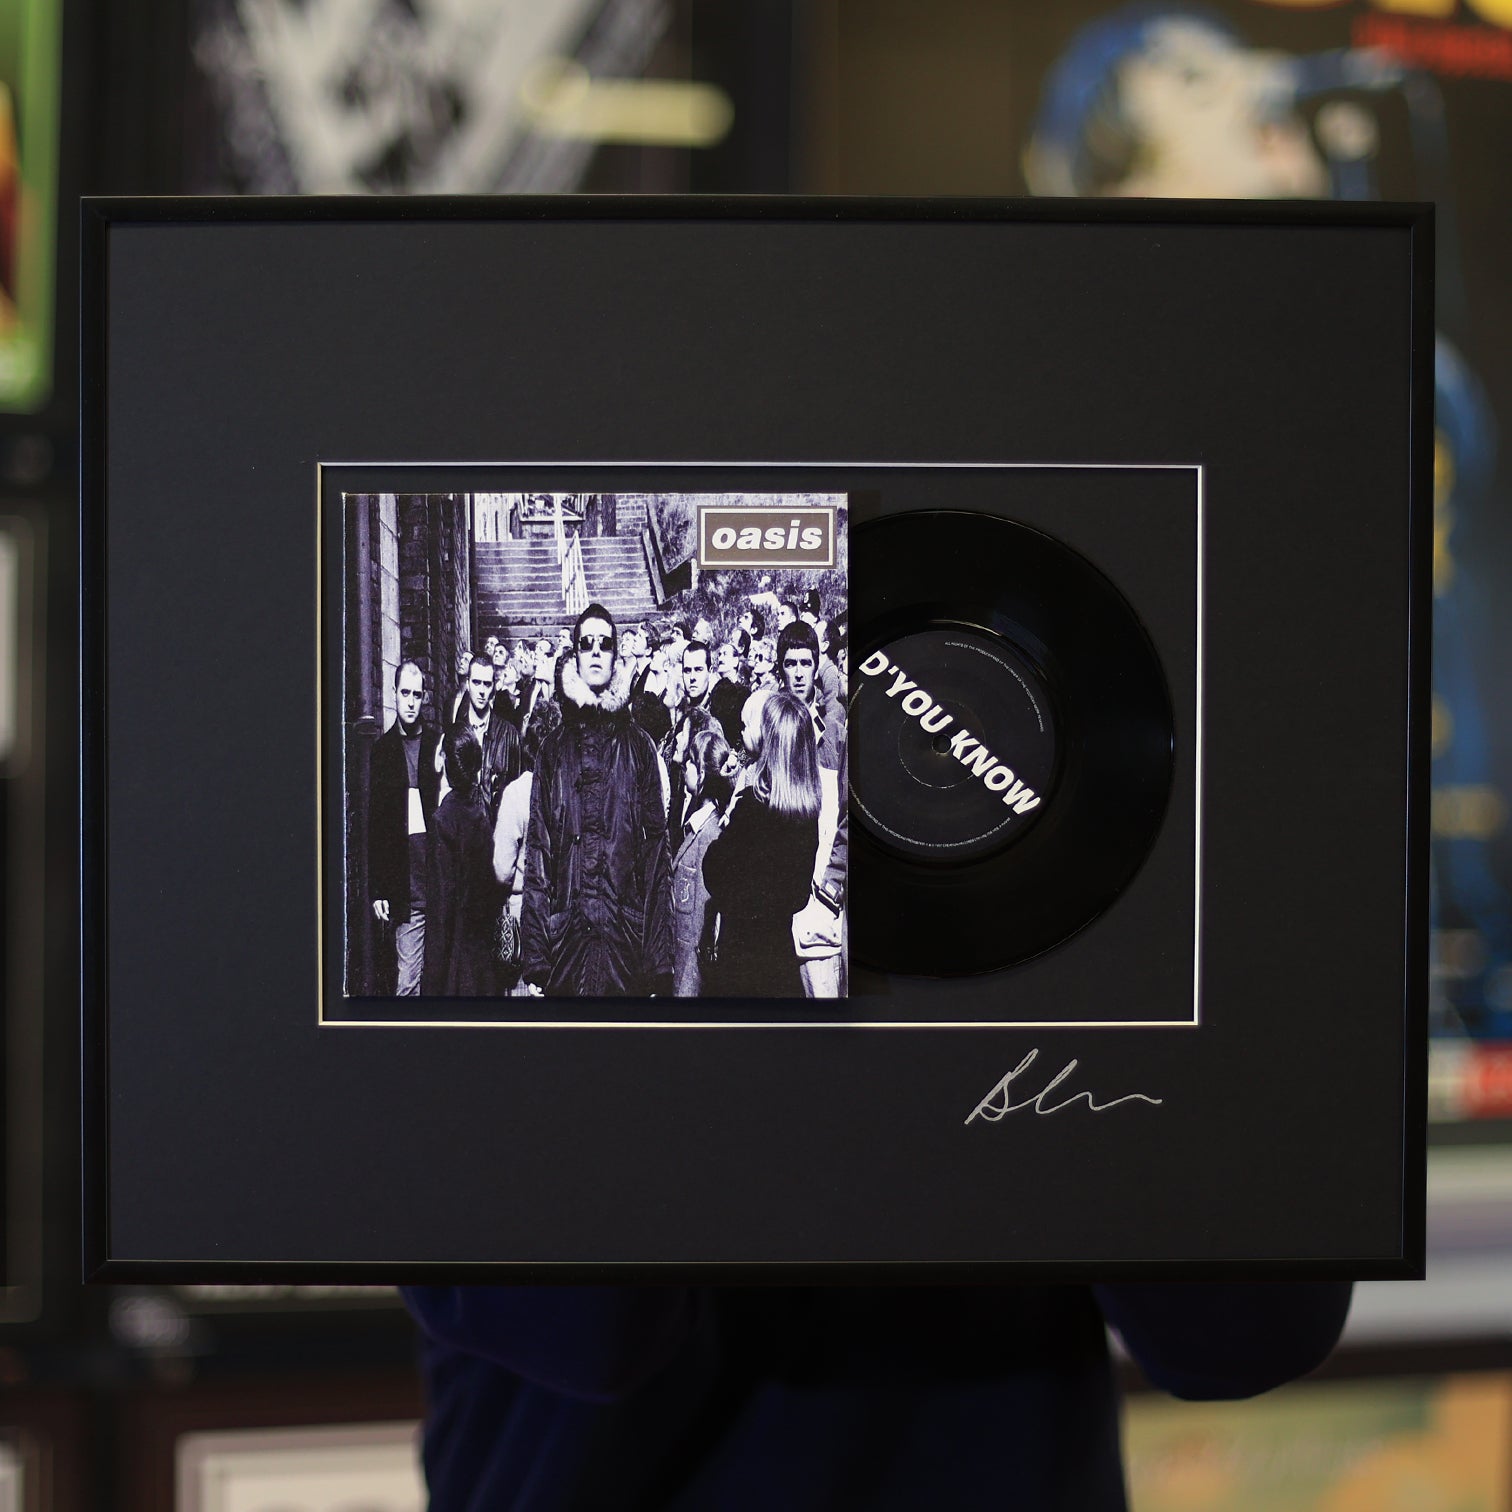 Oasis - D'You Know What I Mean? - Framed 7 inch Vinyl - New Item